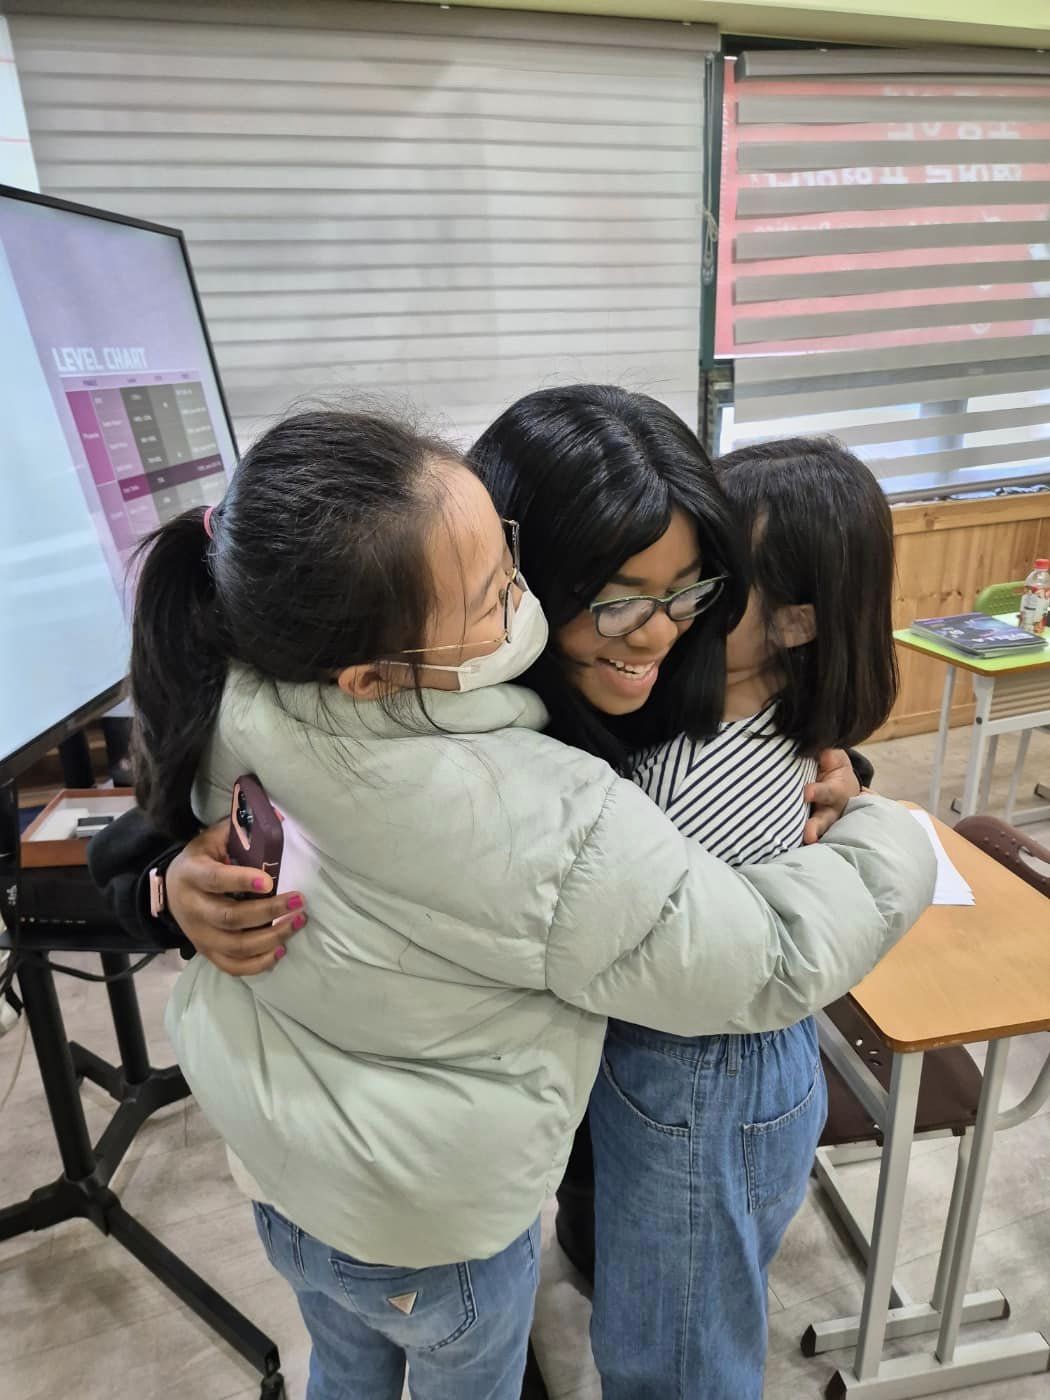 Hugging my students after they surprised me with a cake for my birthday!